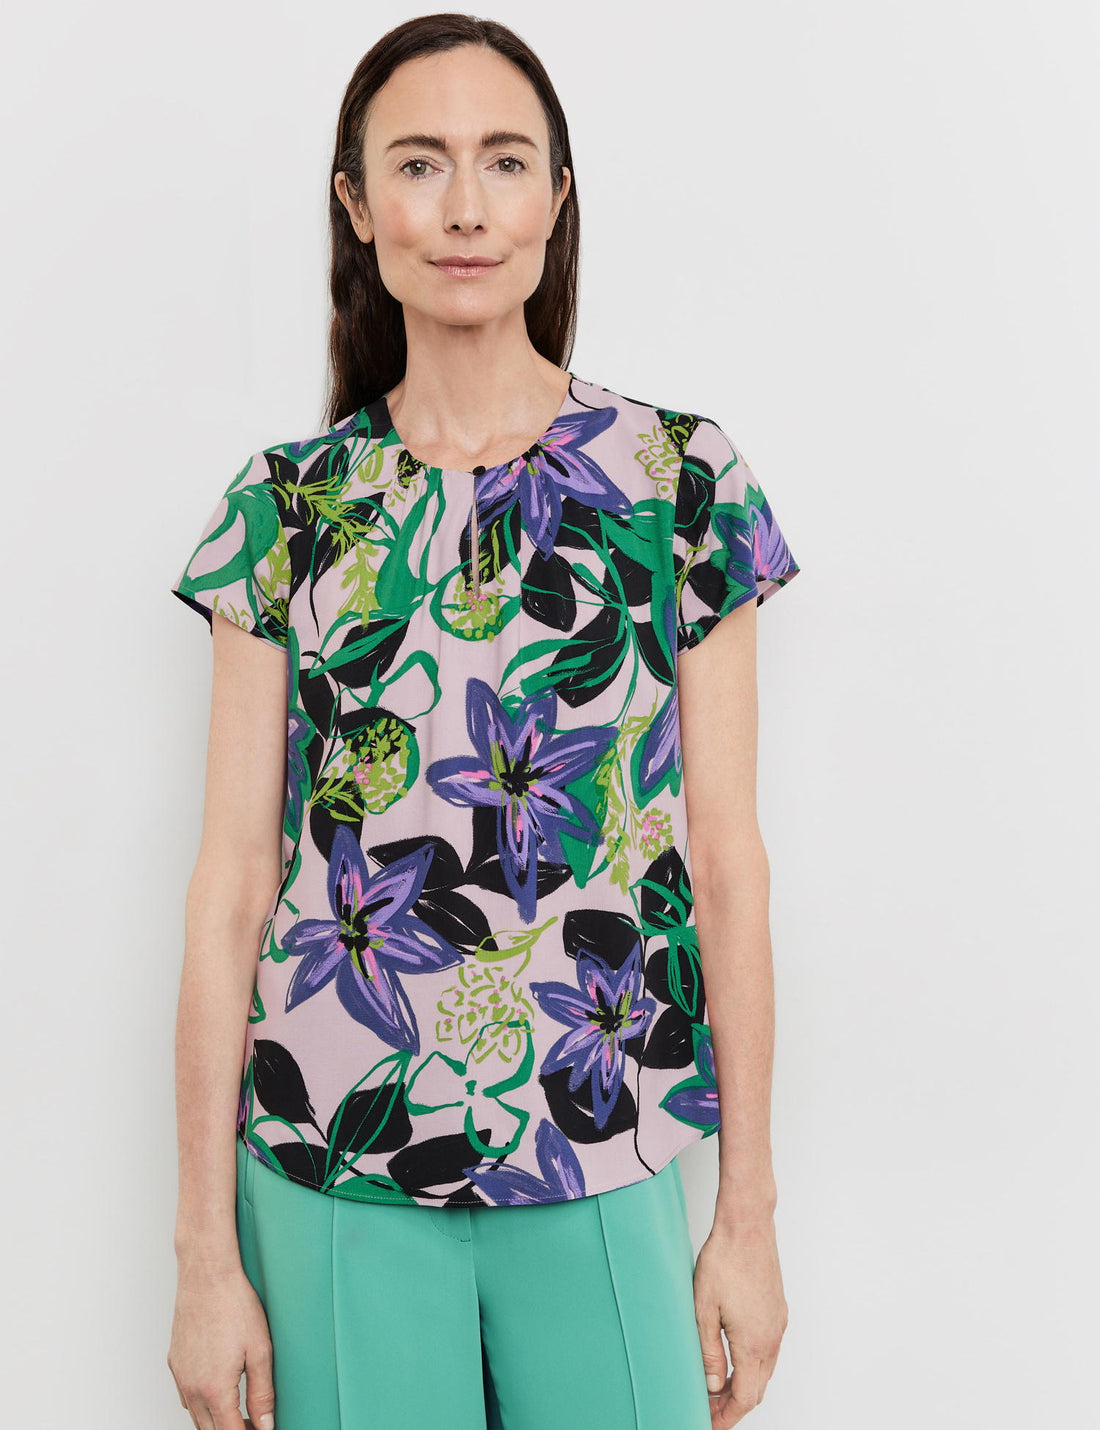 Blouse Top With A Floral Pattern_360019-31408_3058_01